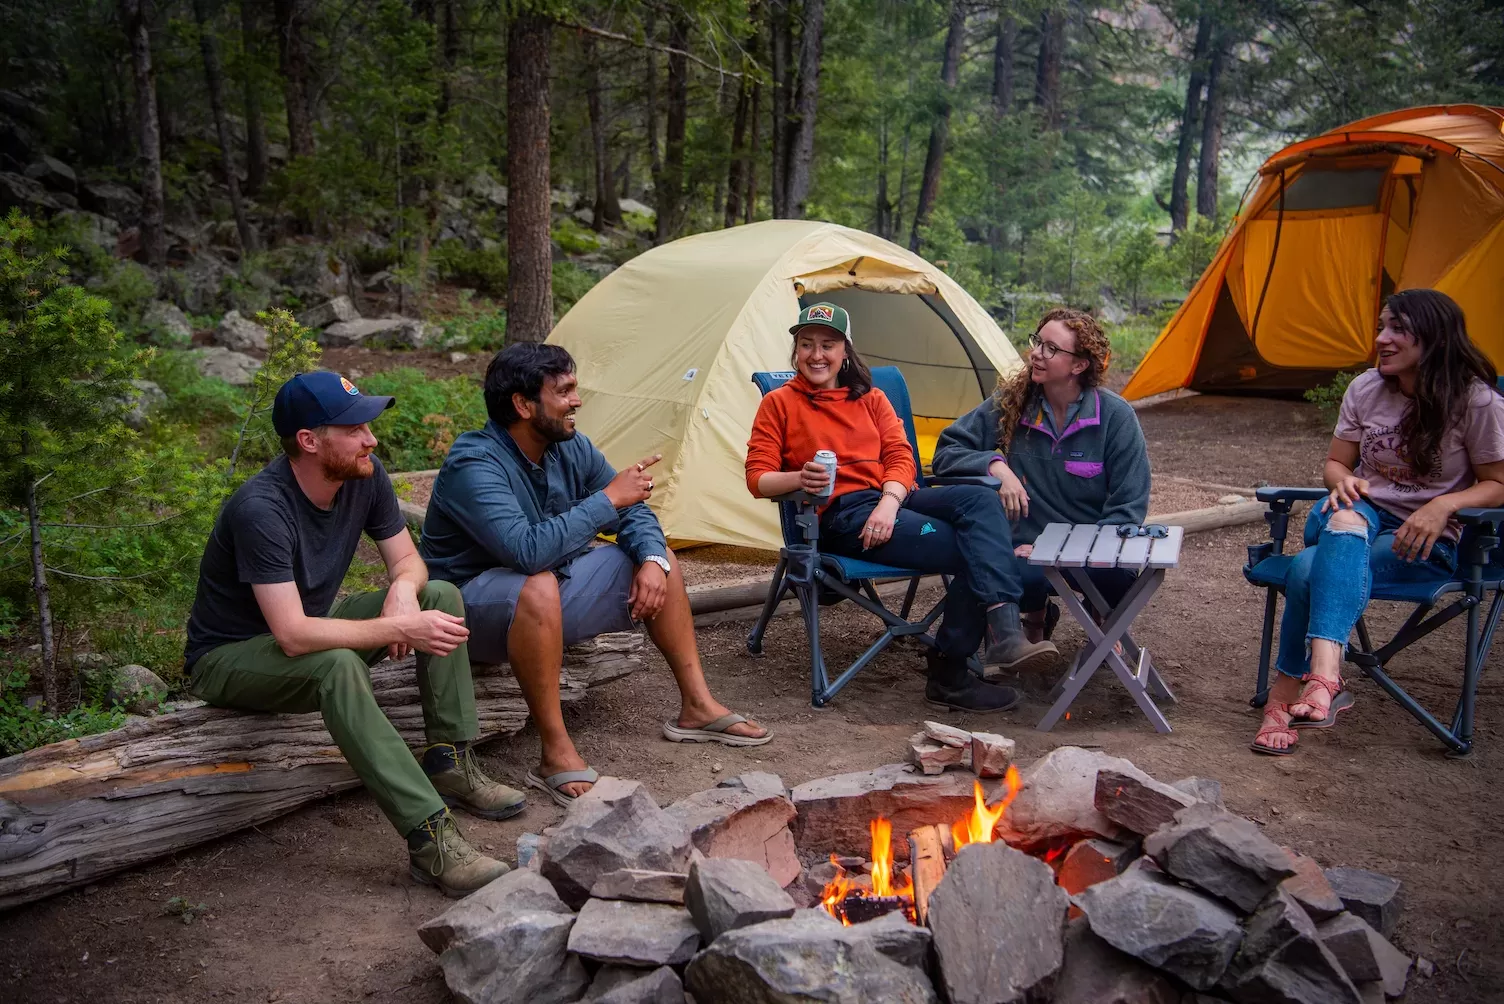 Five people sit around a campfire. There are tents set up in the background